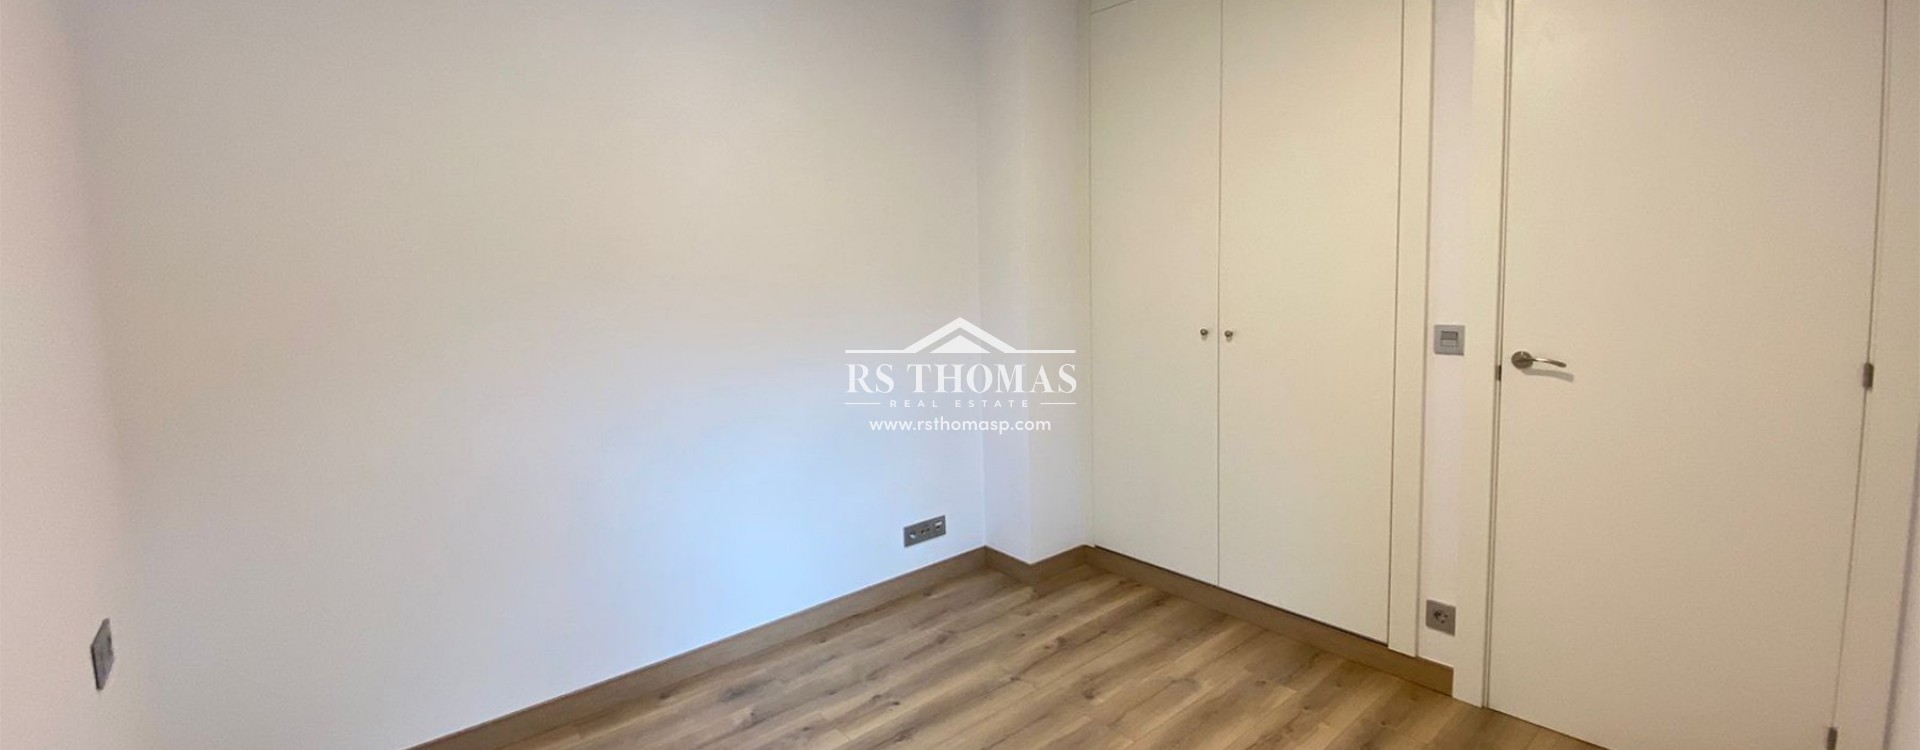 Apartment for rent in Escaldes-Engordany